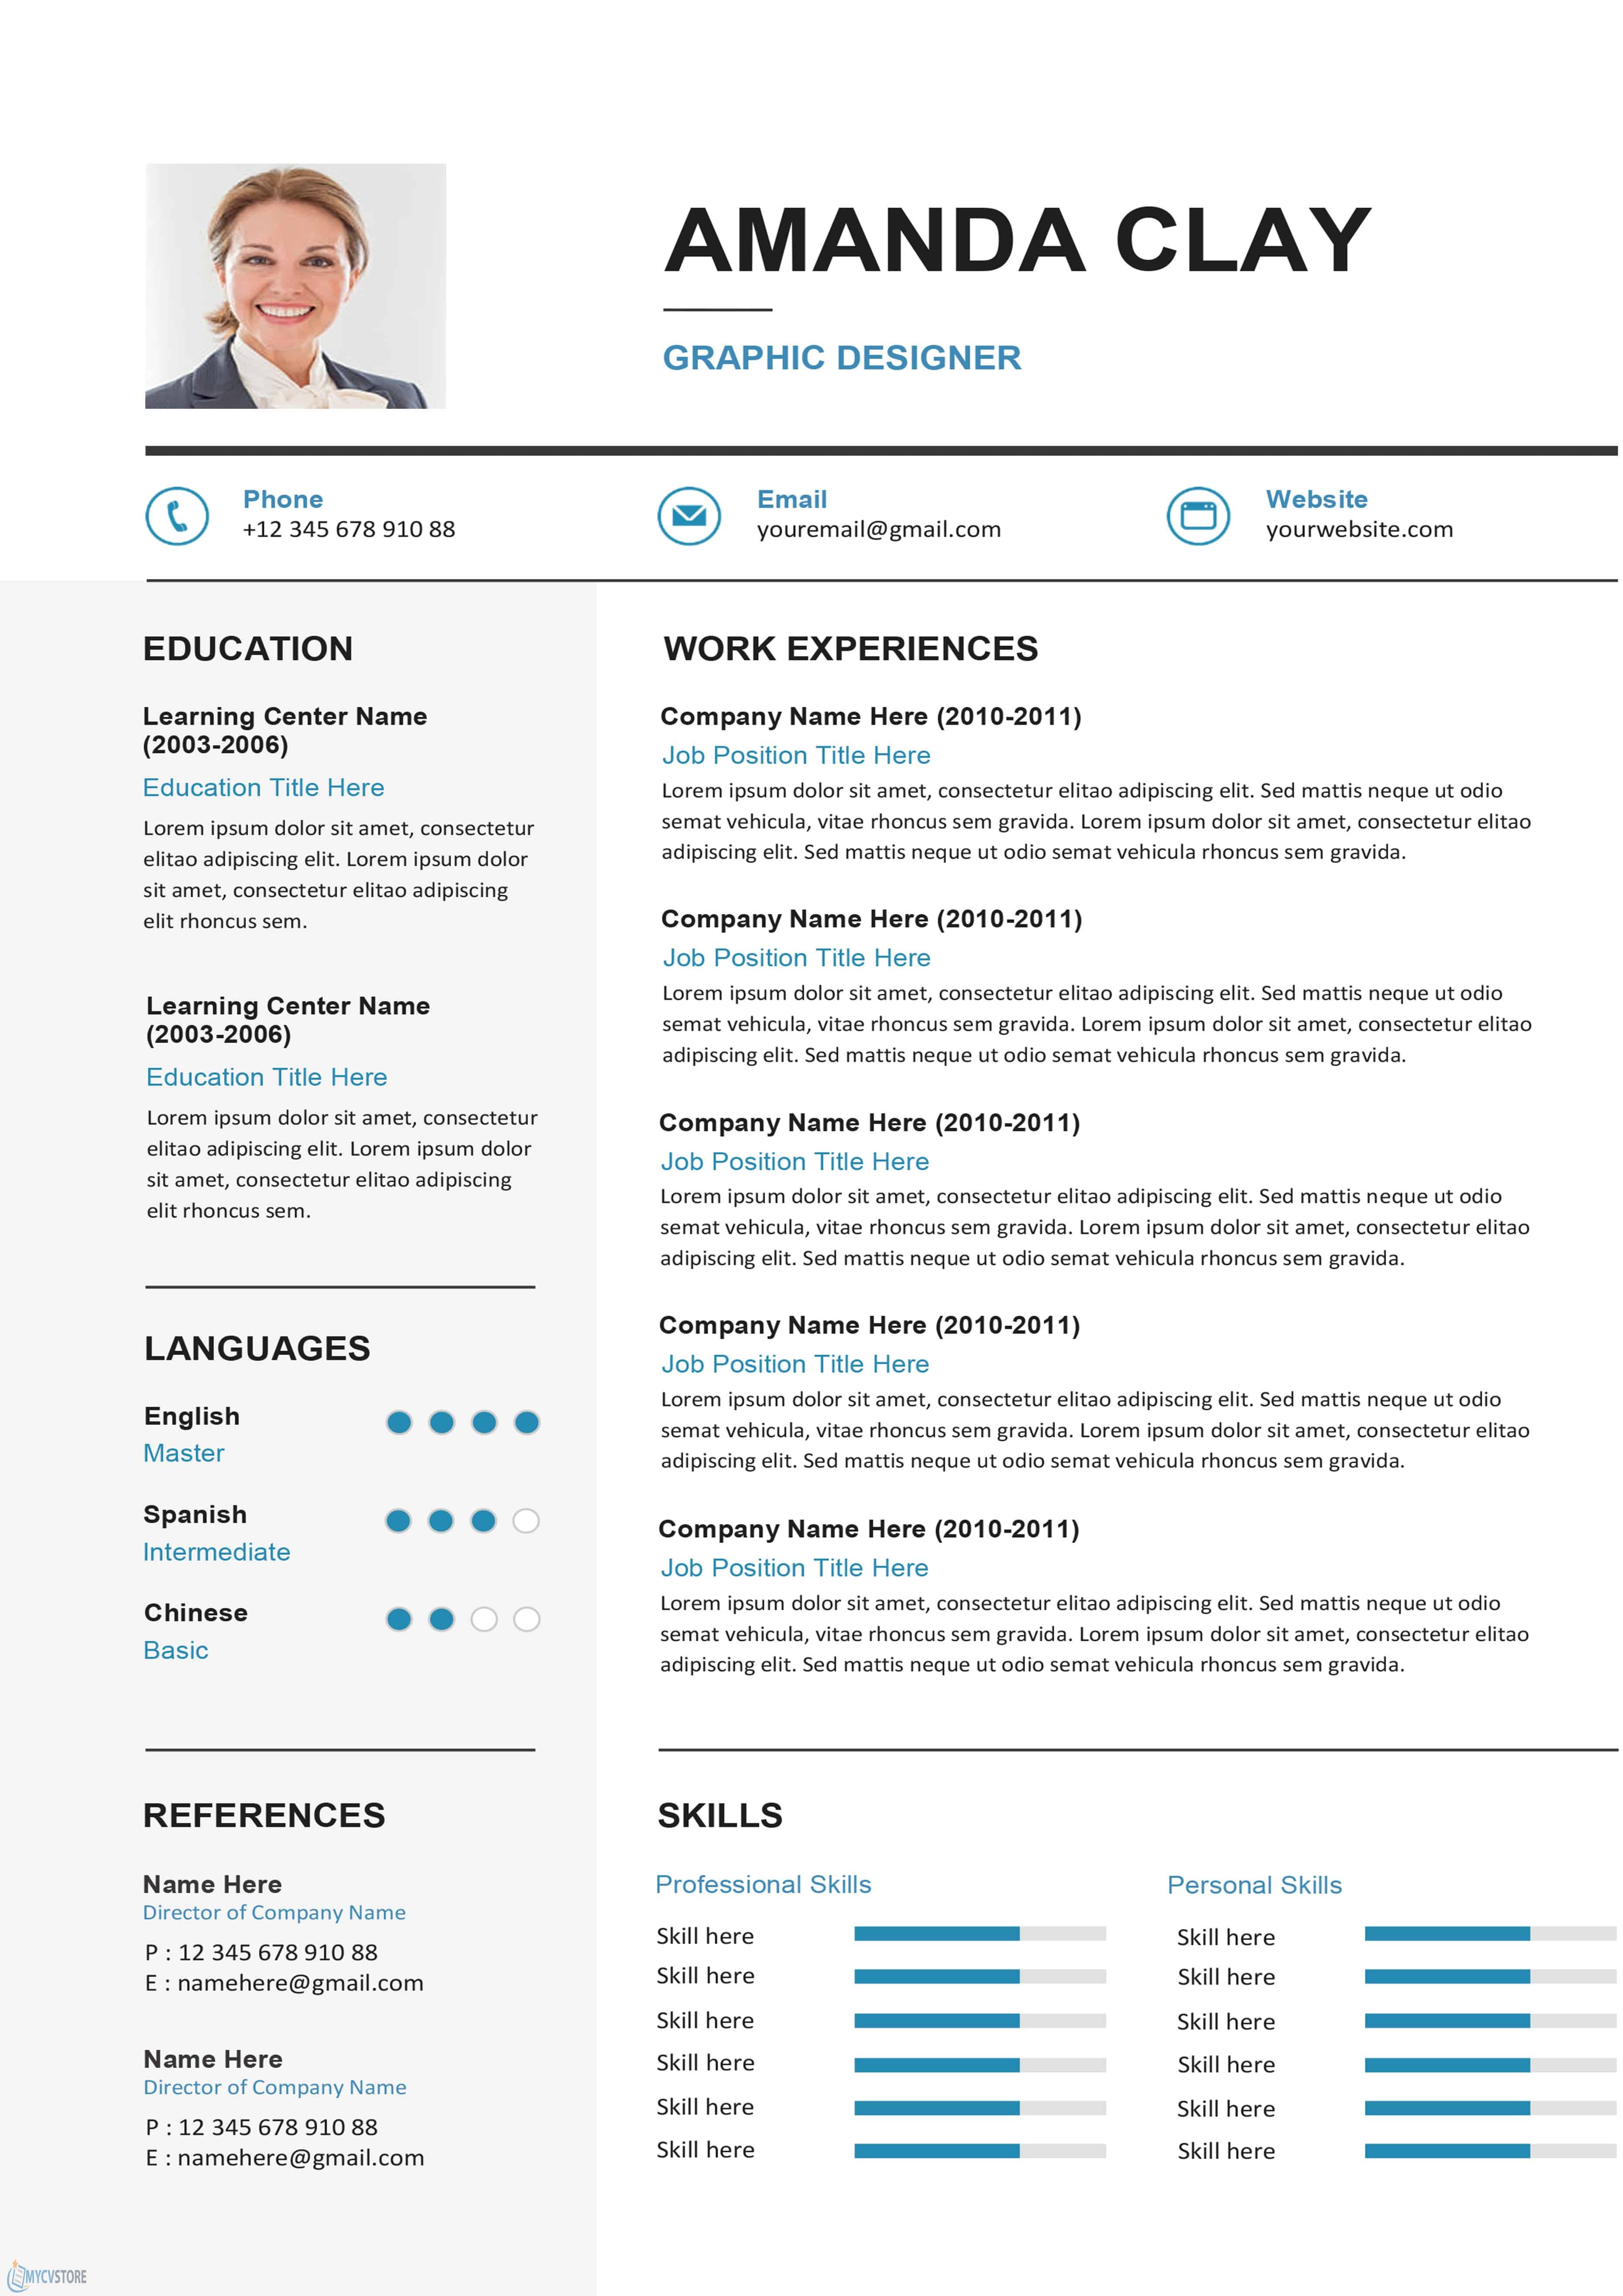 Resume & CV Different Type - Each Page 1 for $1 - SEOClerks